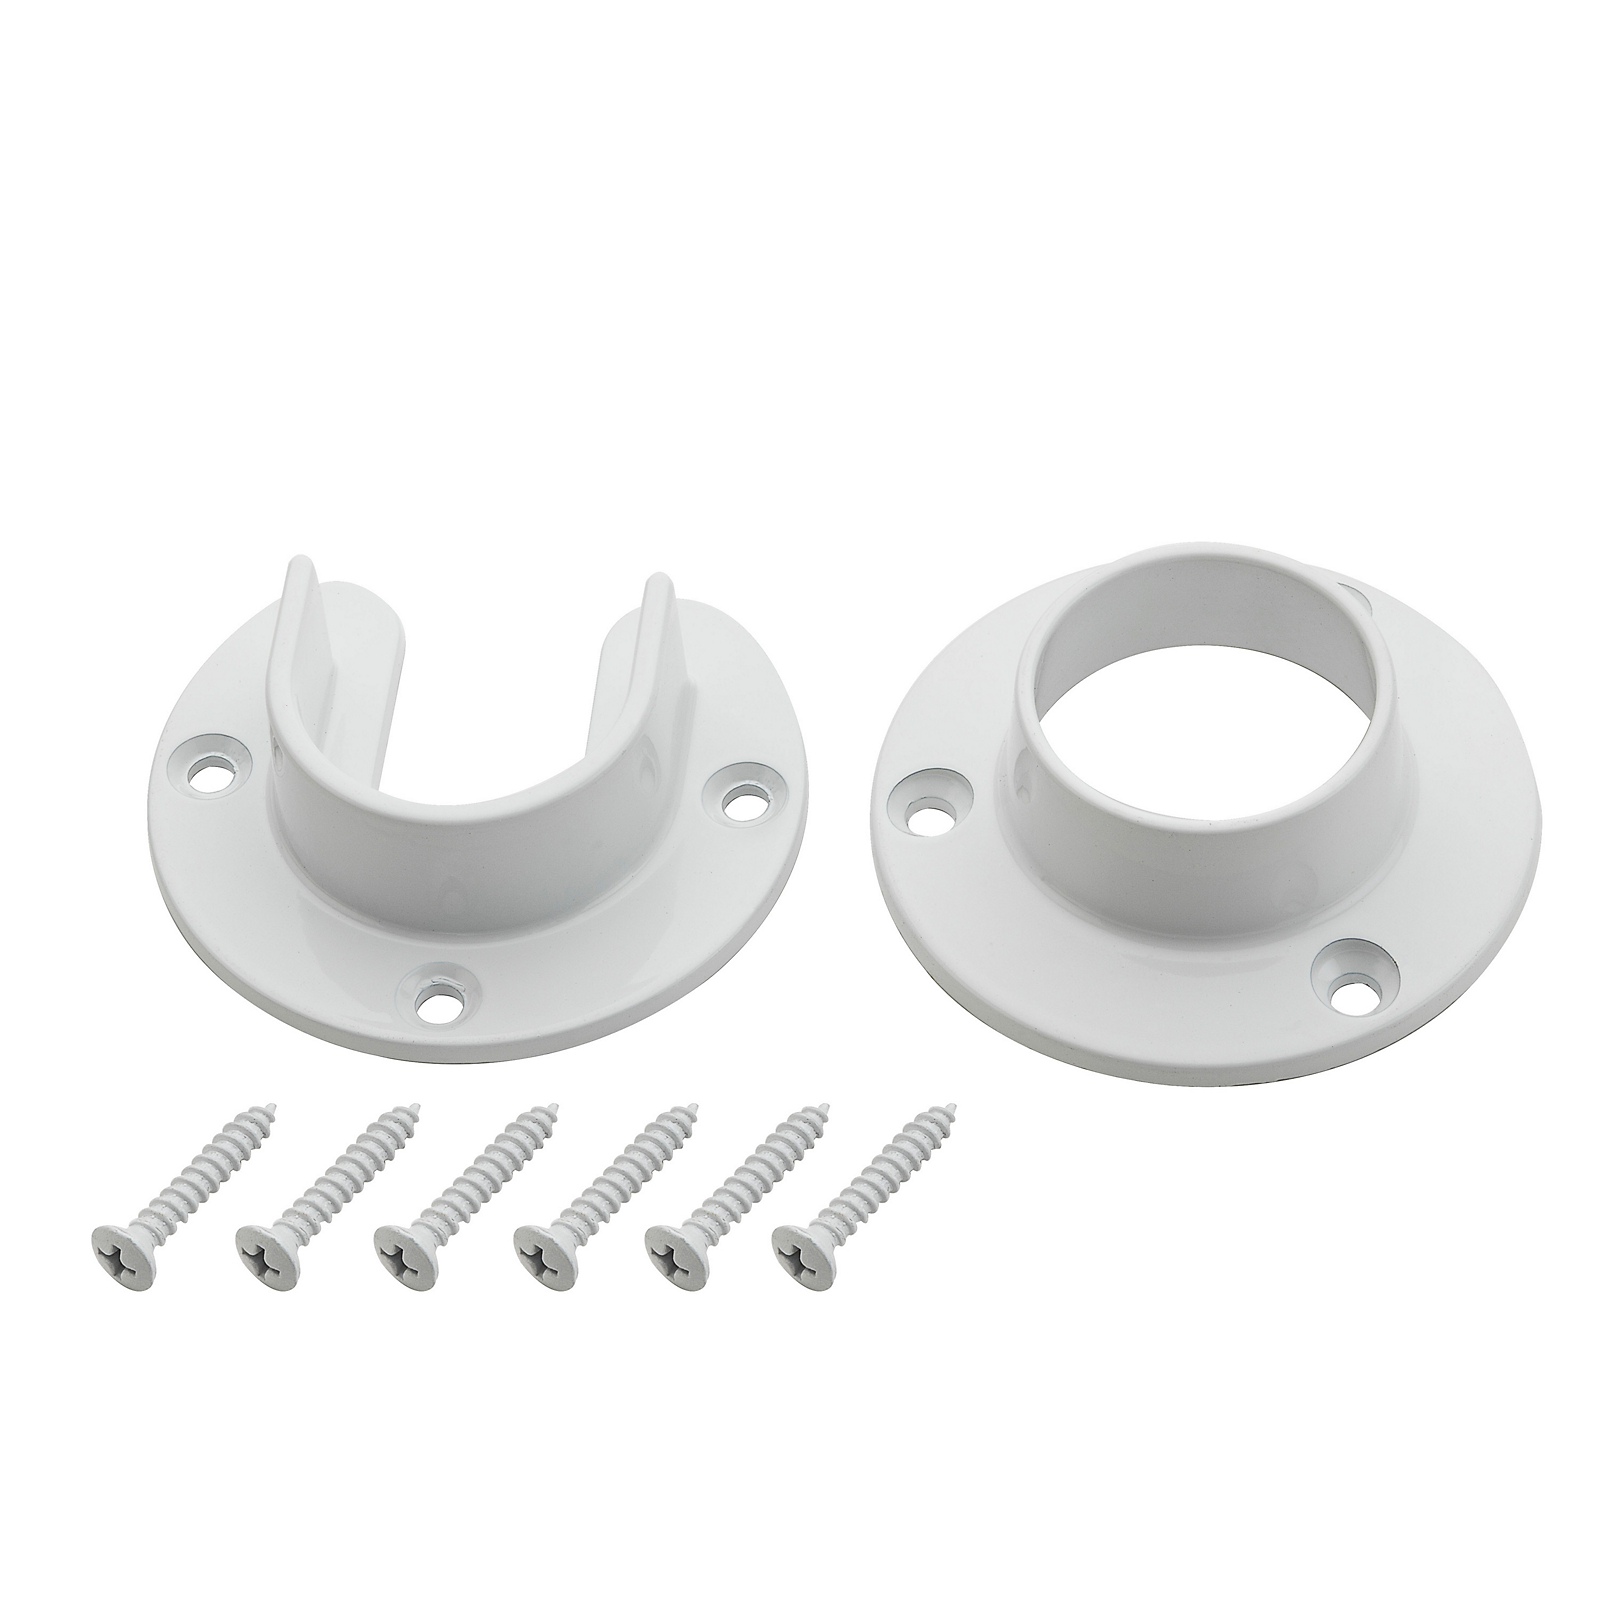 Stanley National S822083 Stanley Home Designs 1-5/16 In. Zinc Closet Rod Socket, White (2-Pack) S822083